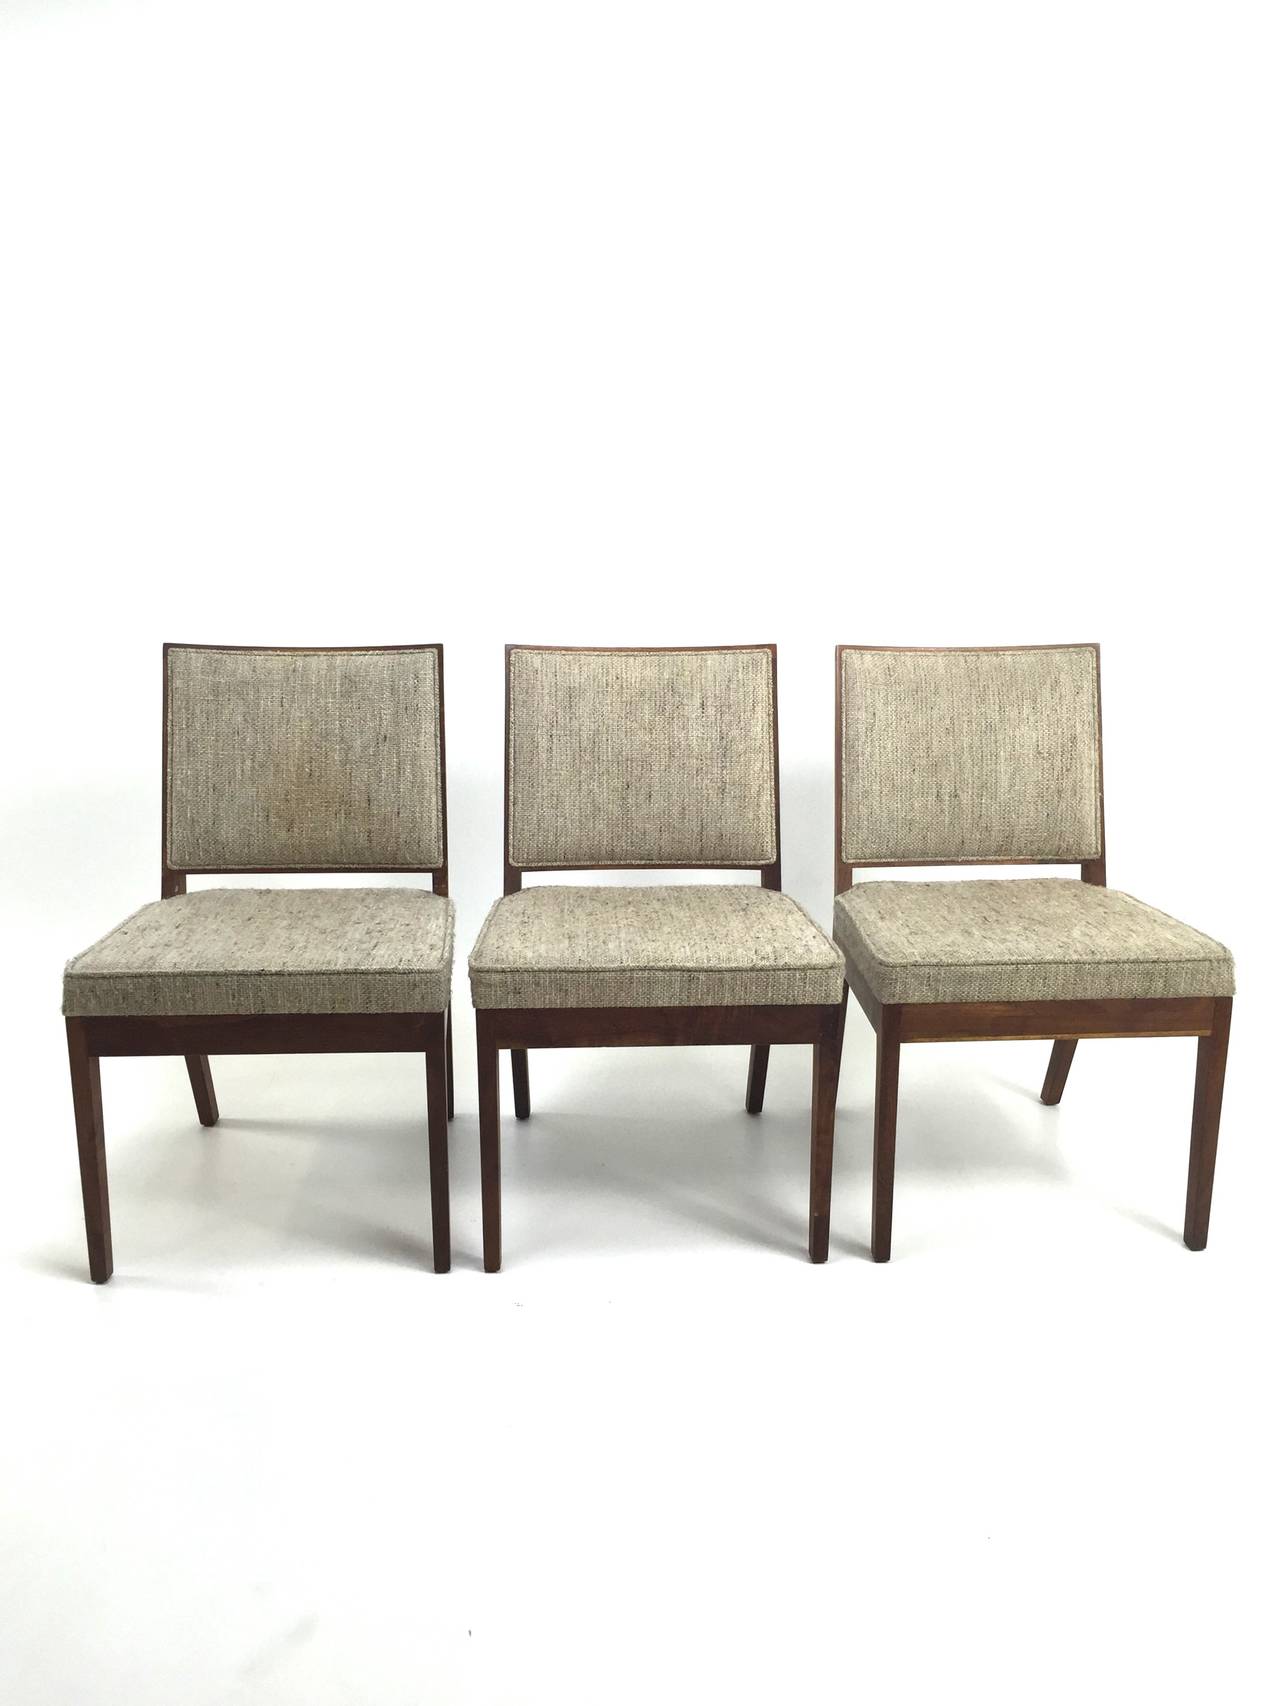 Set of six Glenn of California dining chairs by John Kapel. American Black Walnut with inset framed upholstered backs and box welted seats. Need recovering.